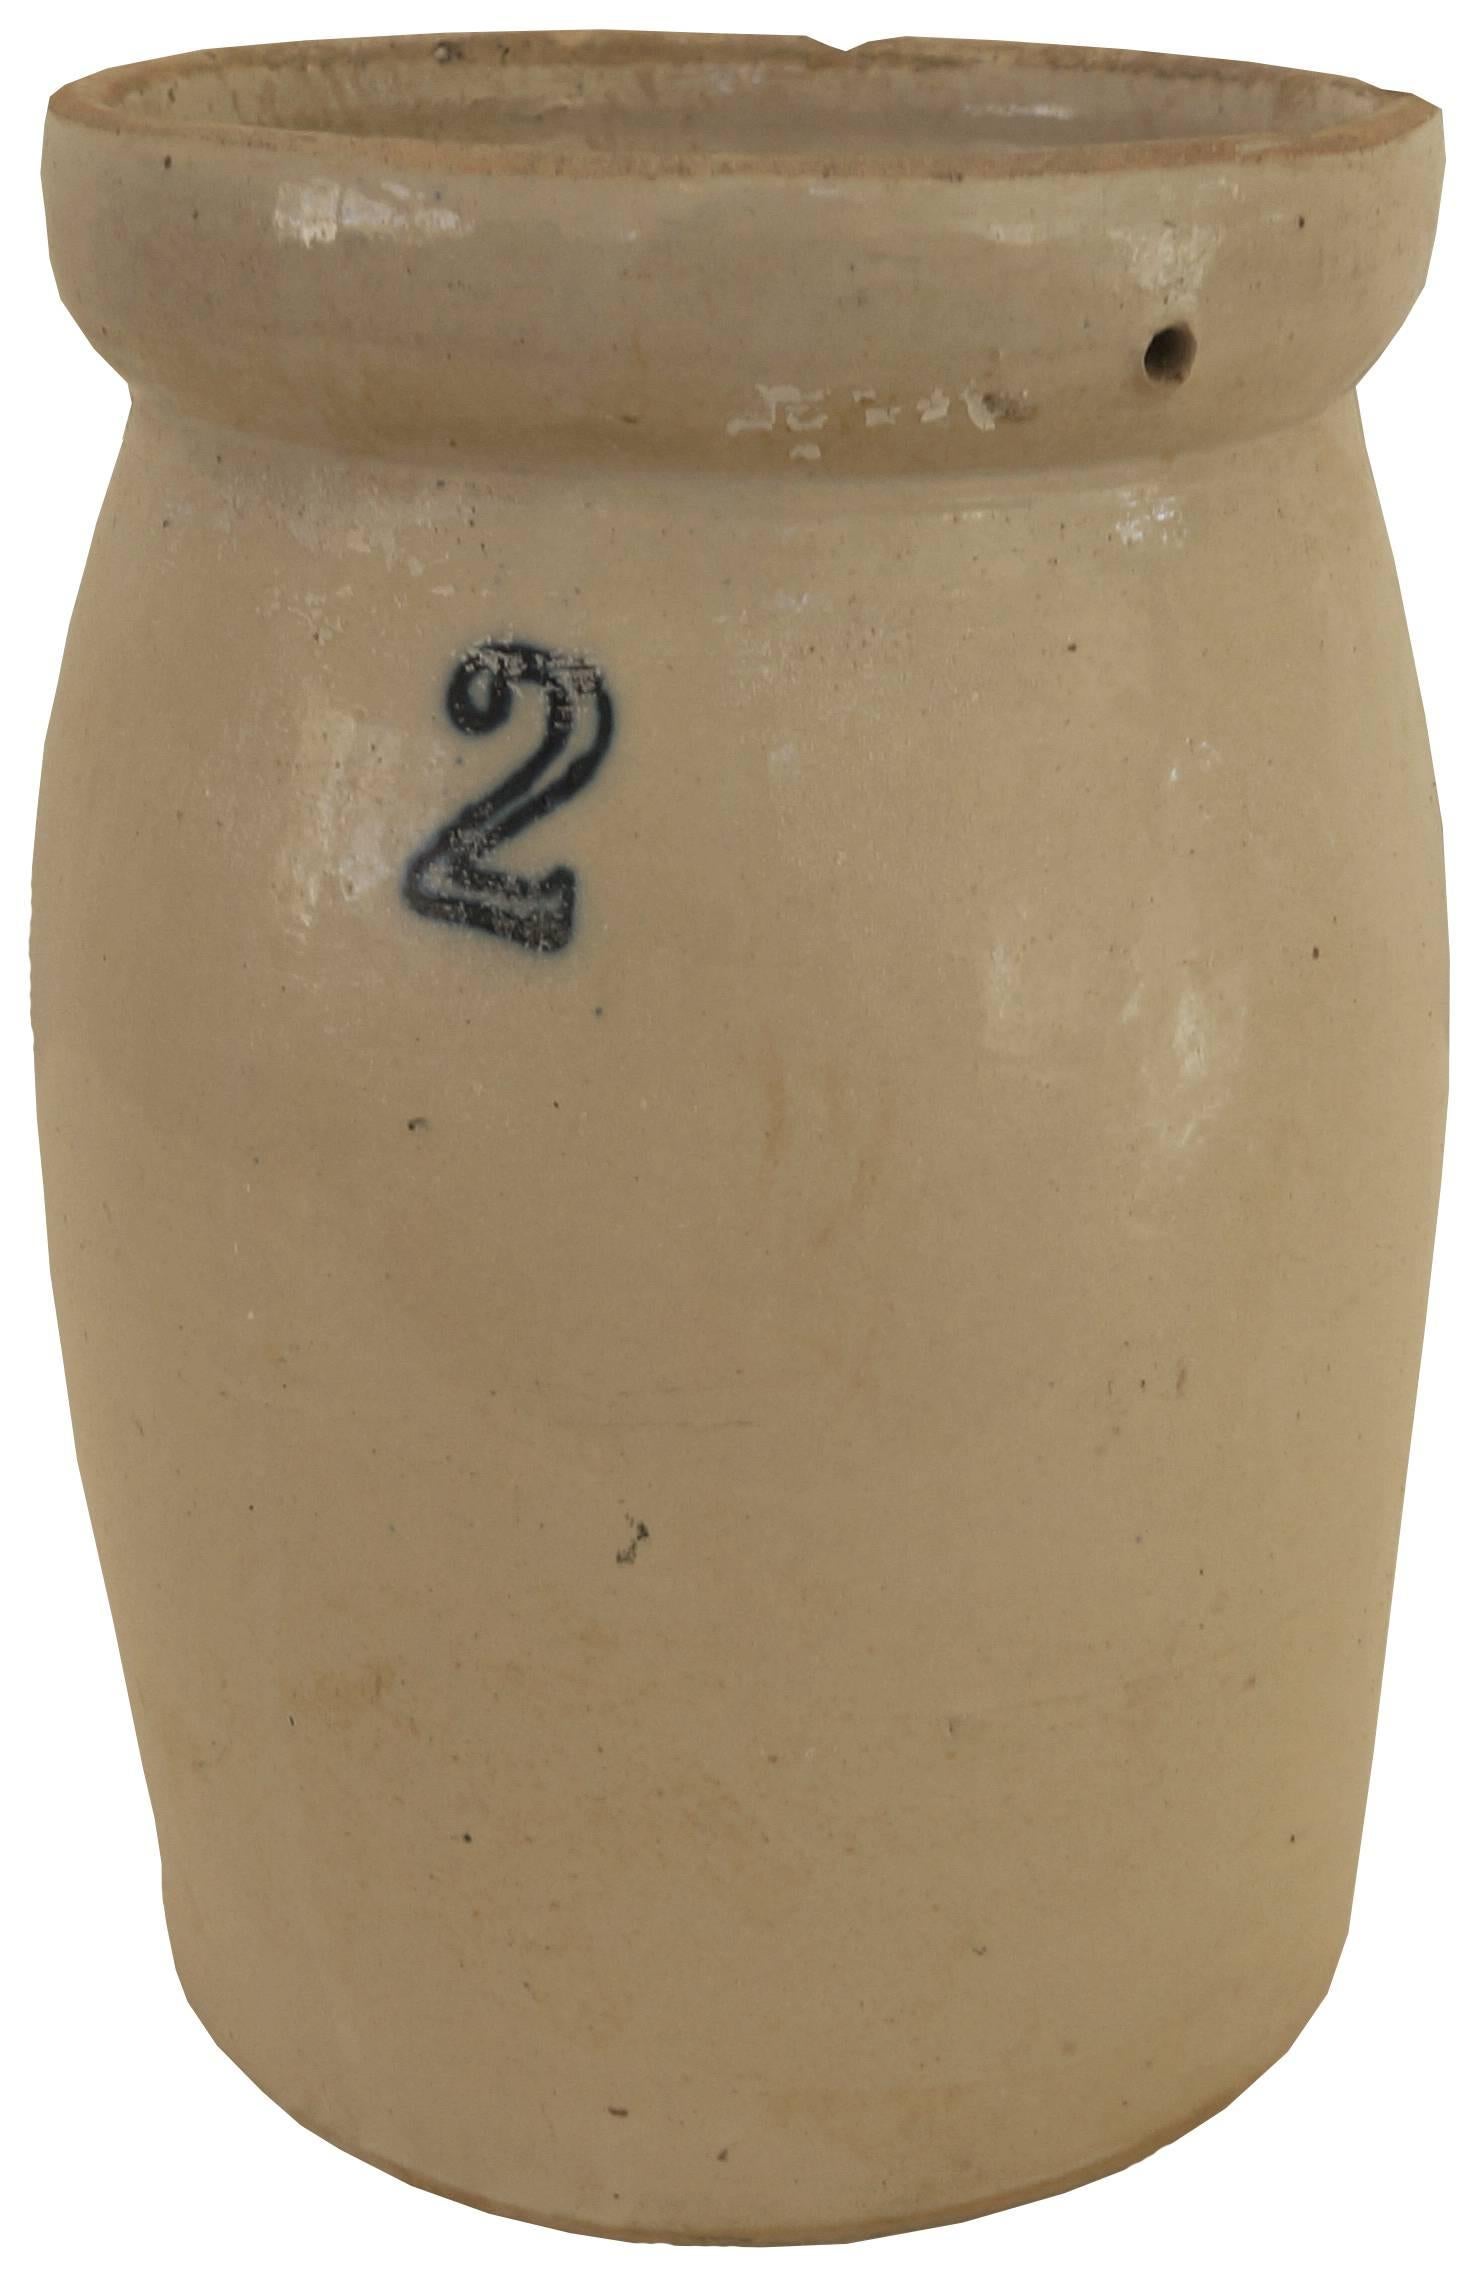 Collection of three stoneware storage crocks with each labeled with a number.

Small 